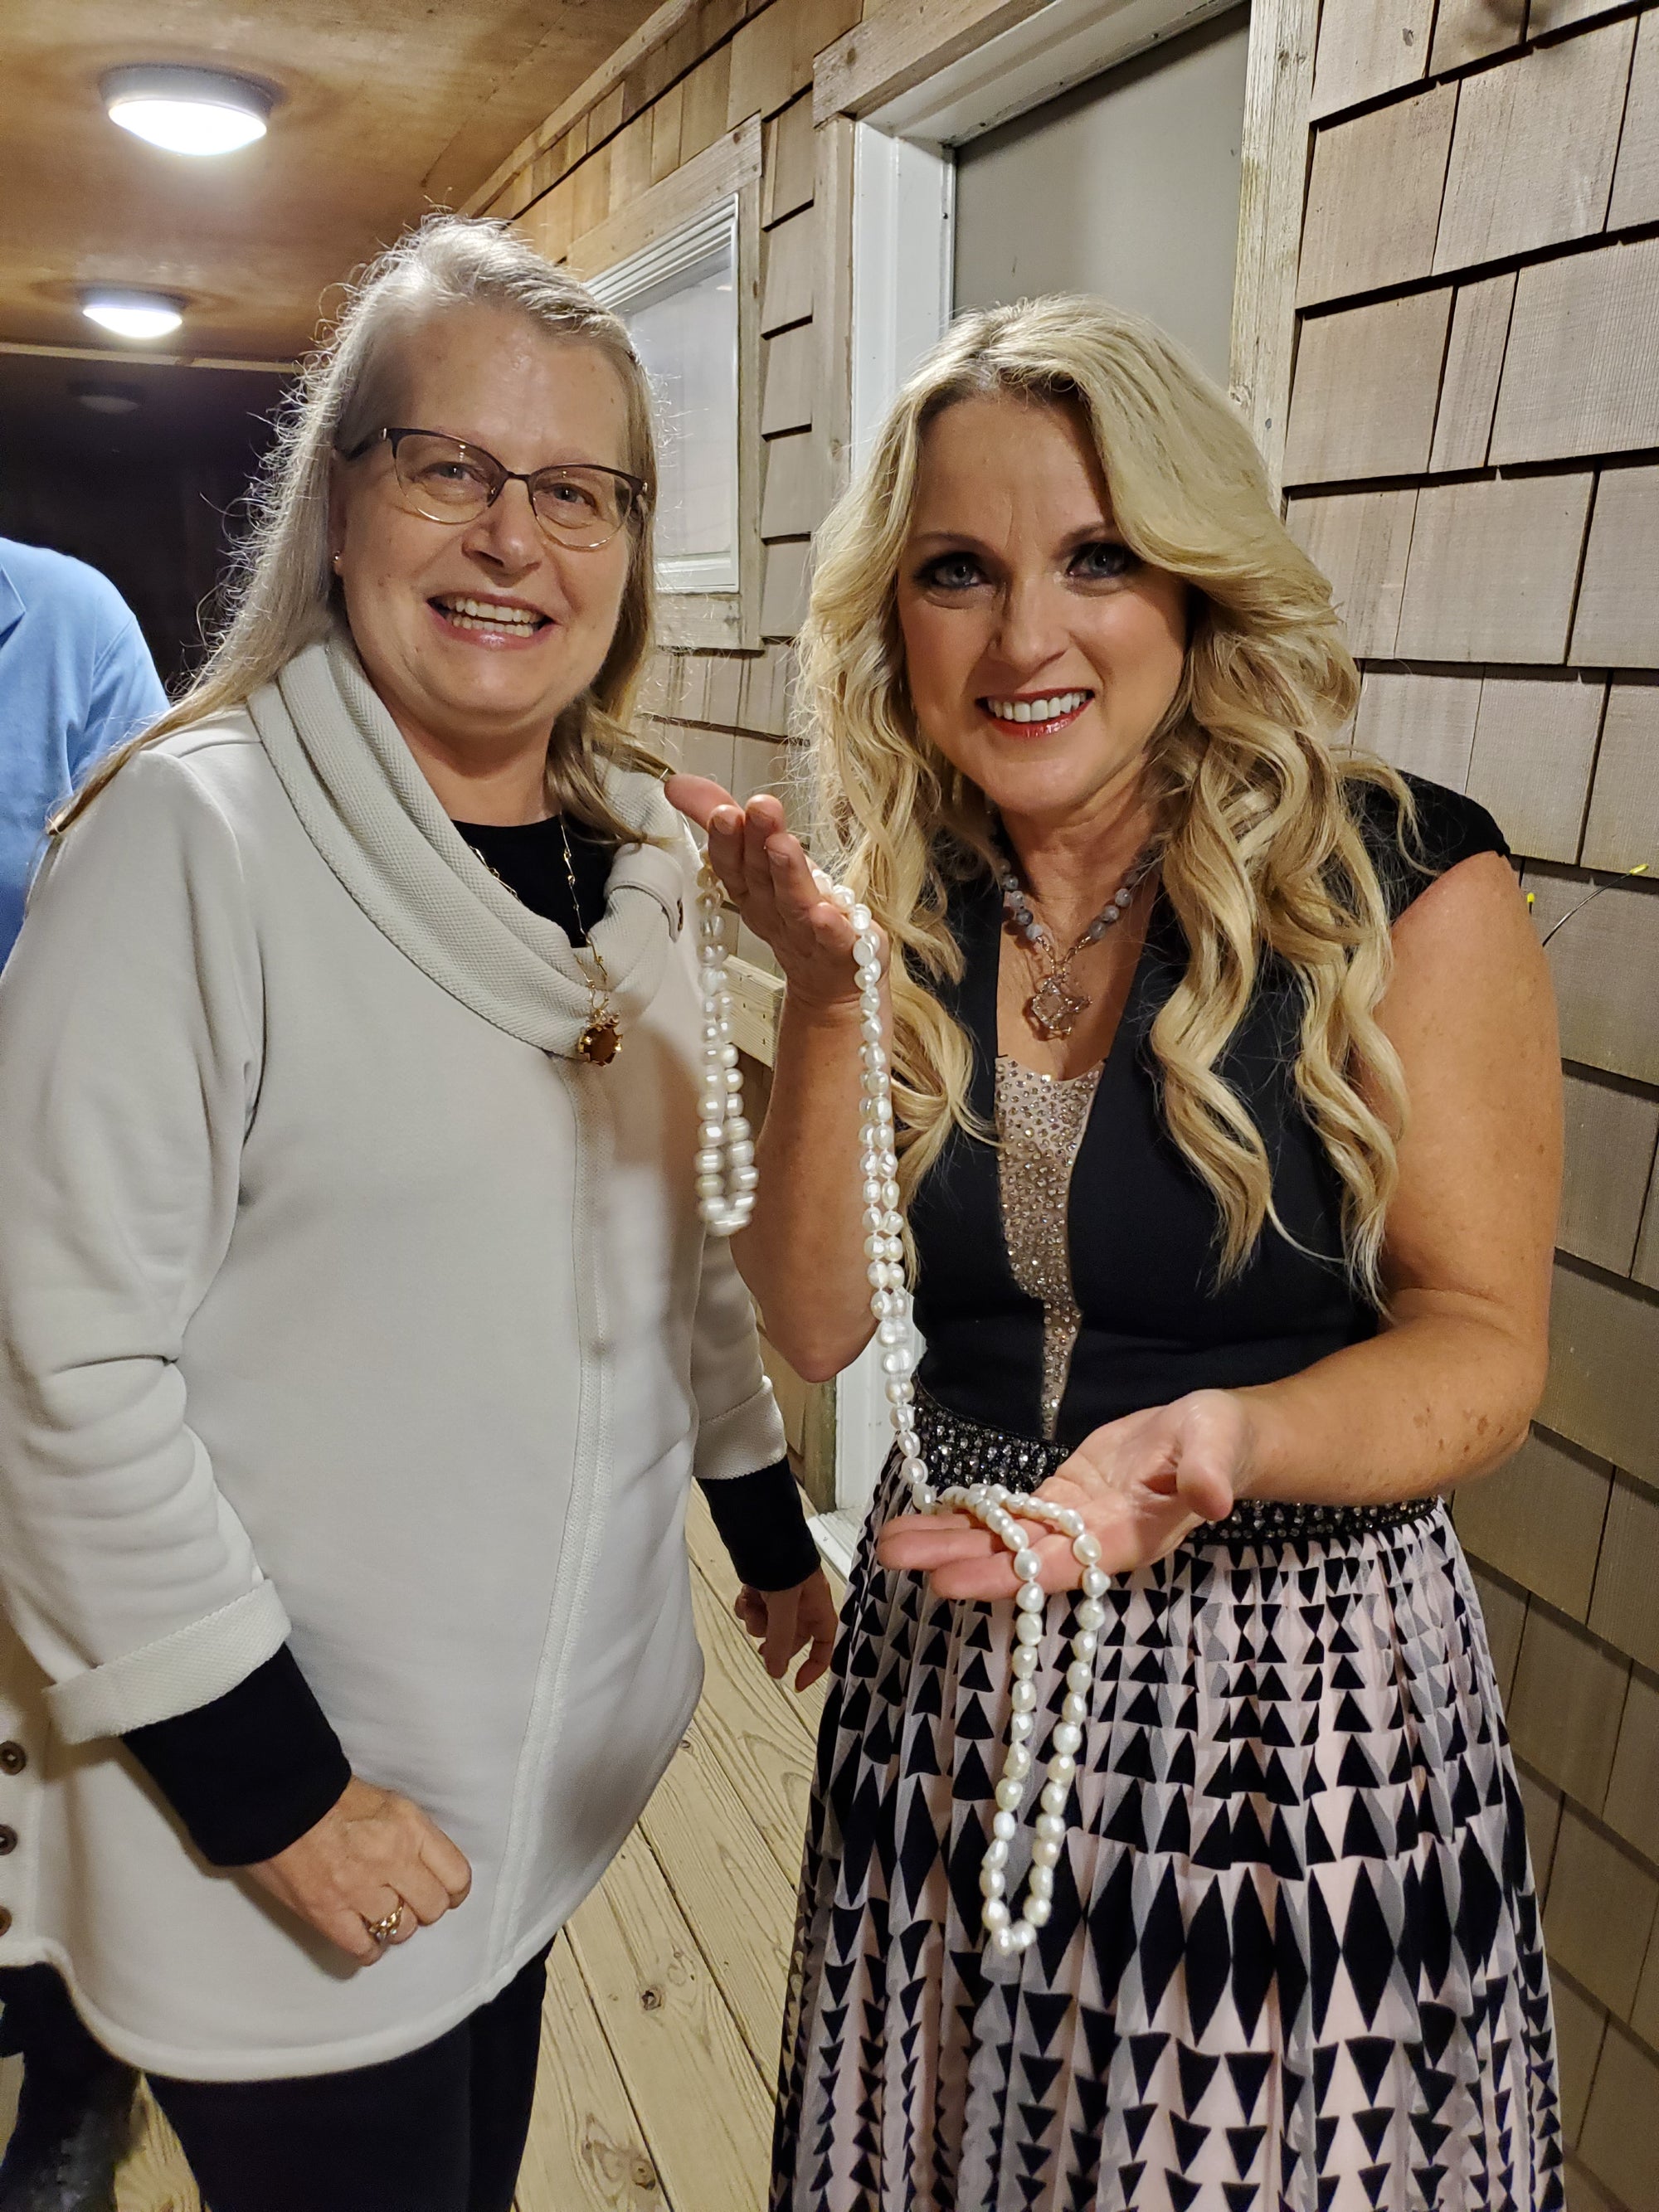 Rhonda Vincent Wears Jewelry by Gail at OBX Bluegrass Festival!